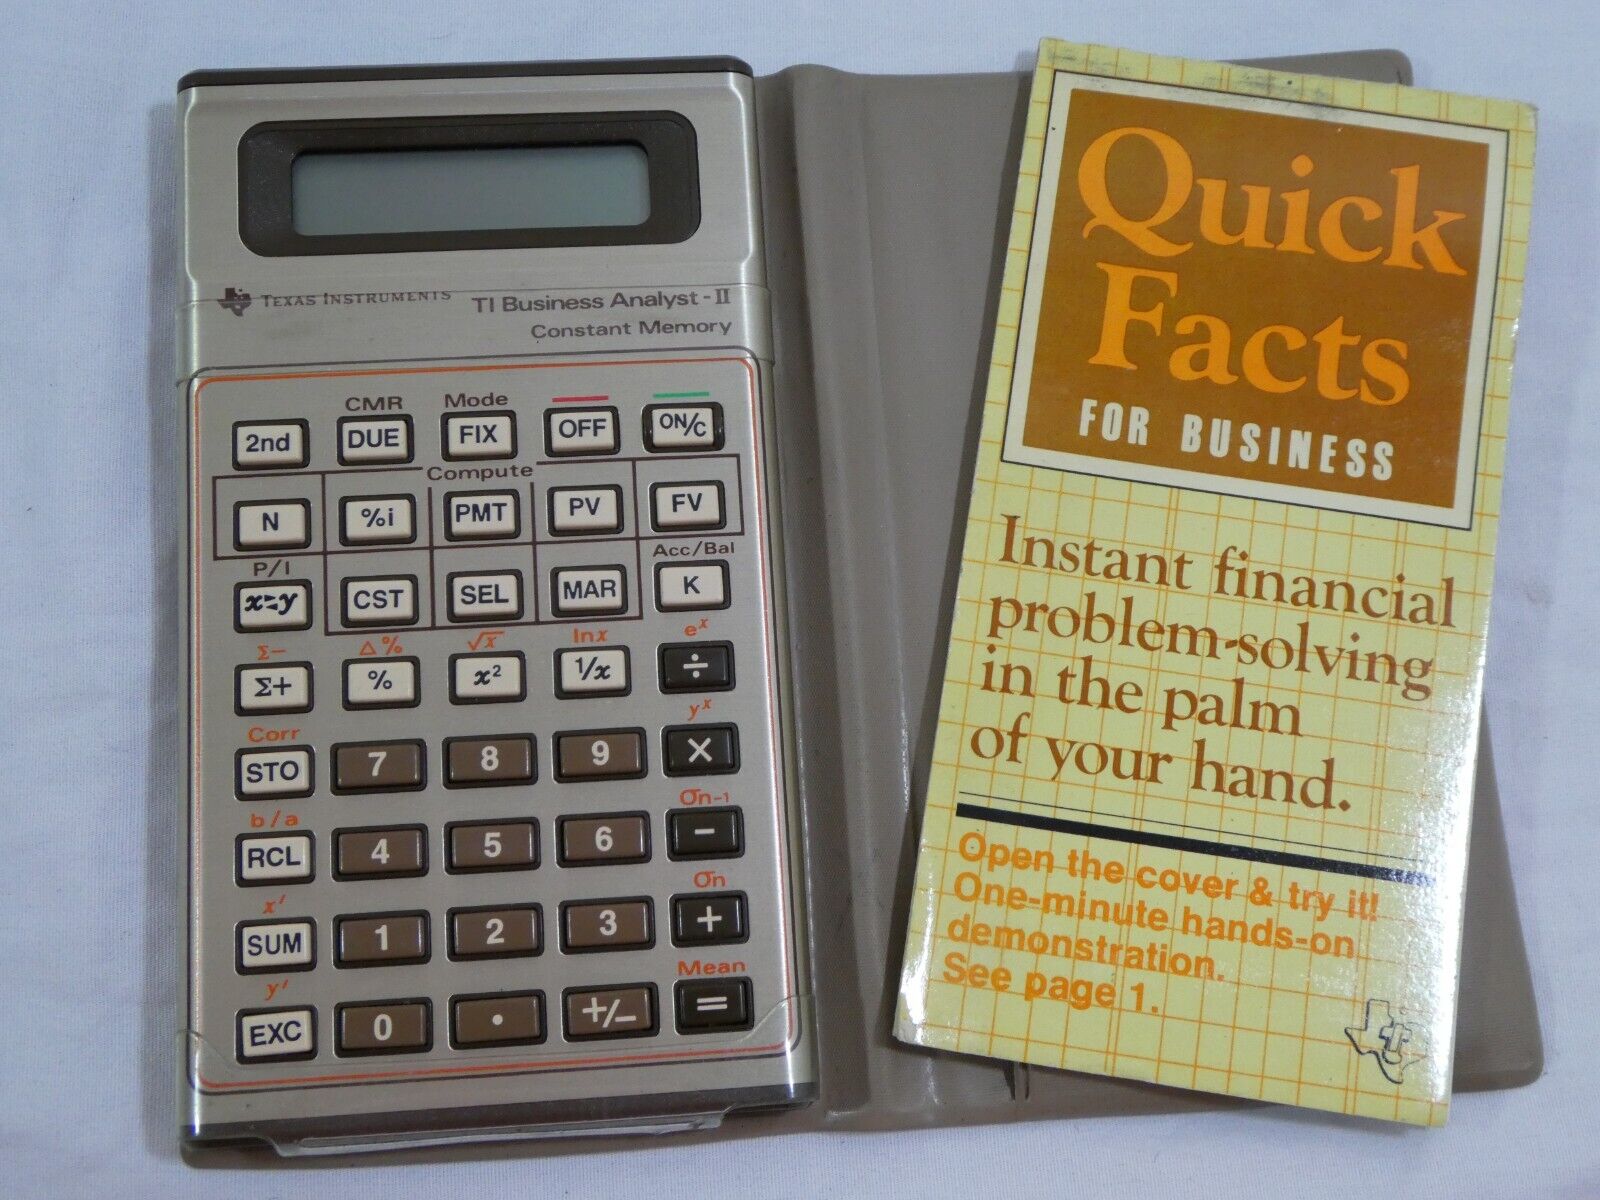 Texas Instruments TI-Business Analyst-II Constant Memory Calculator Booklet Case